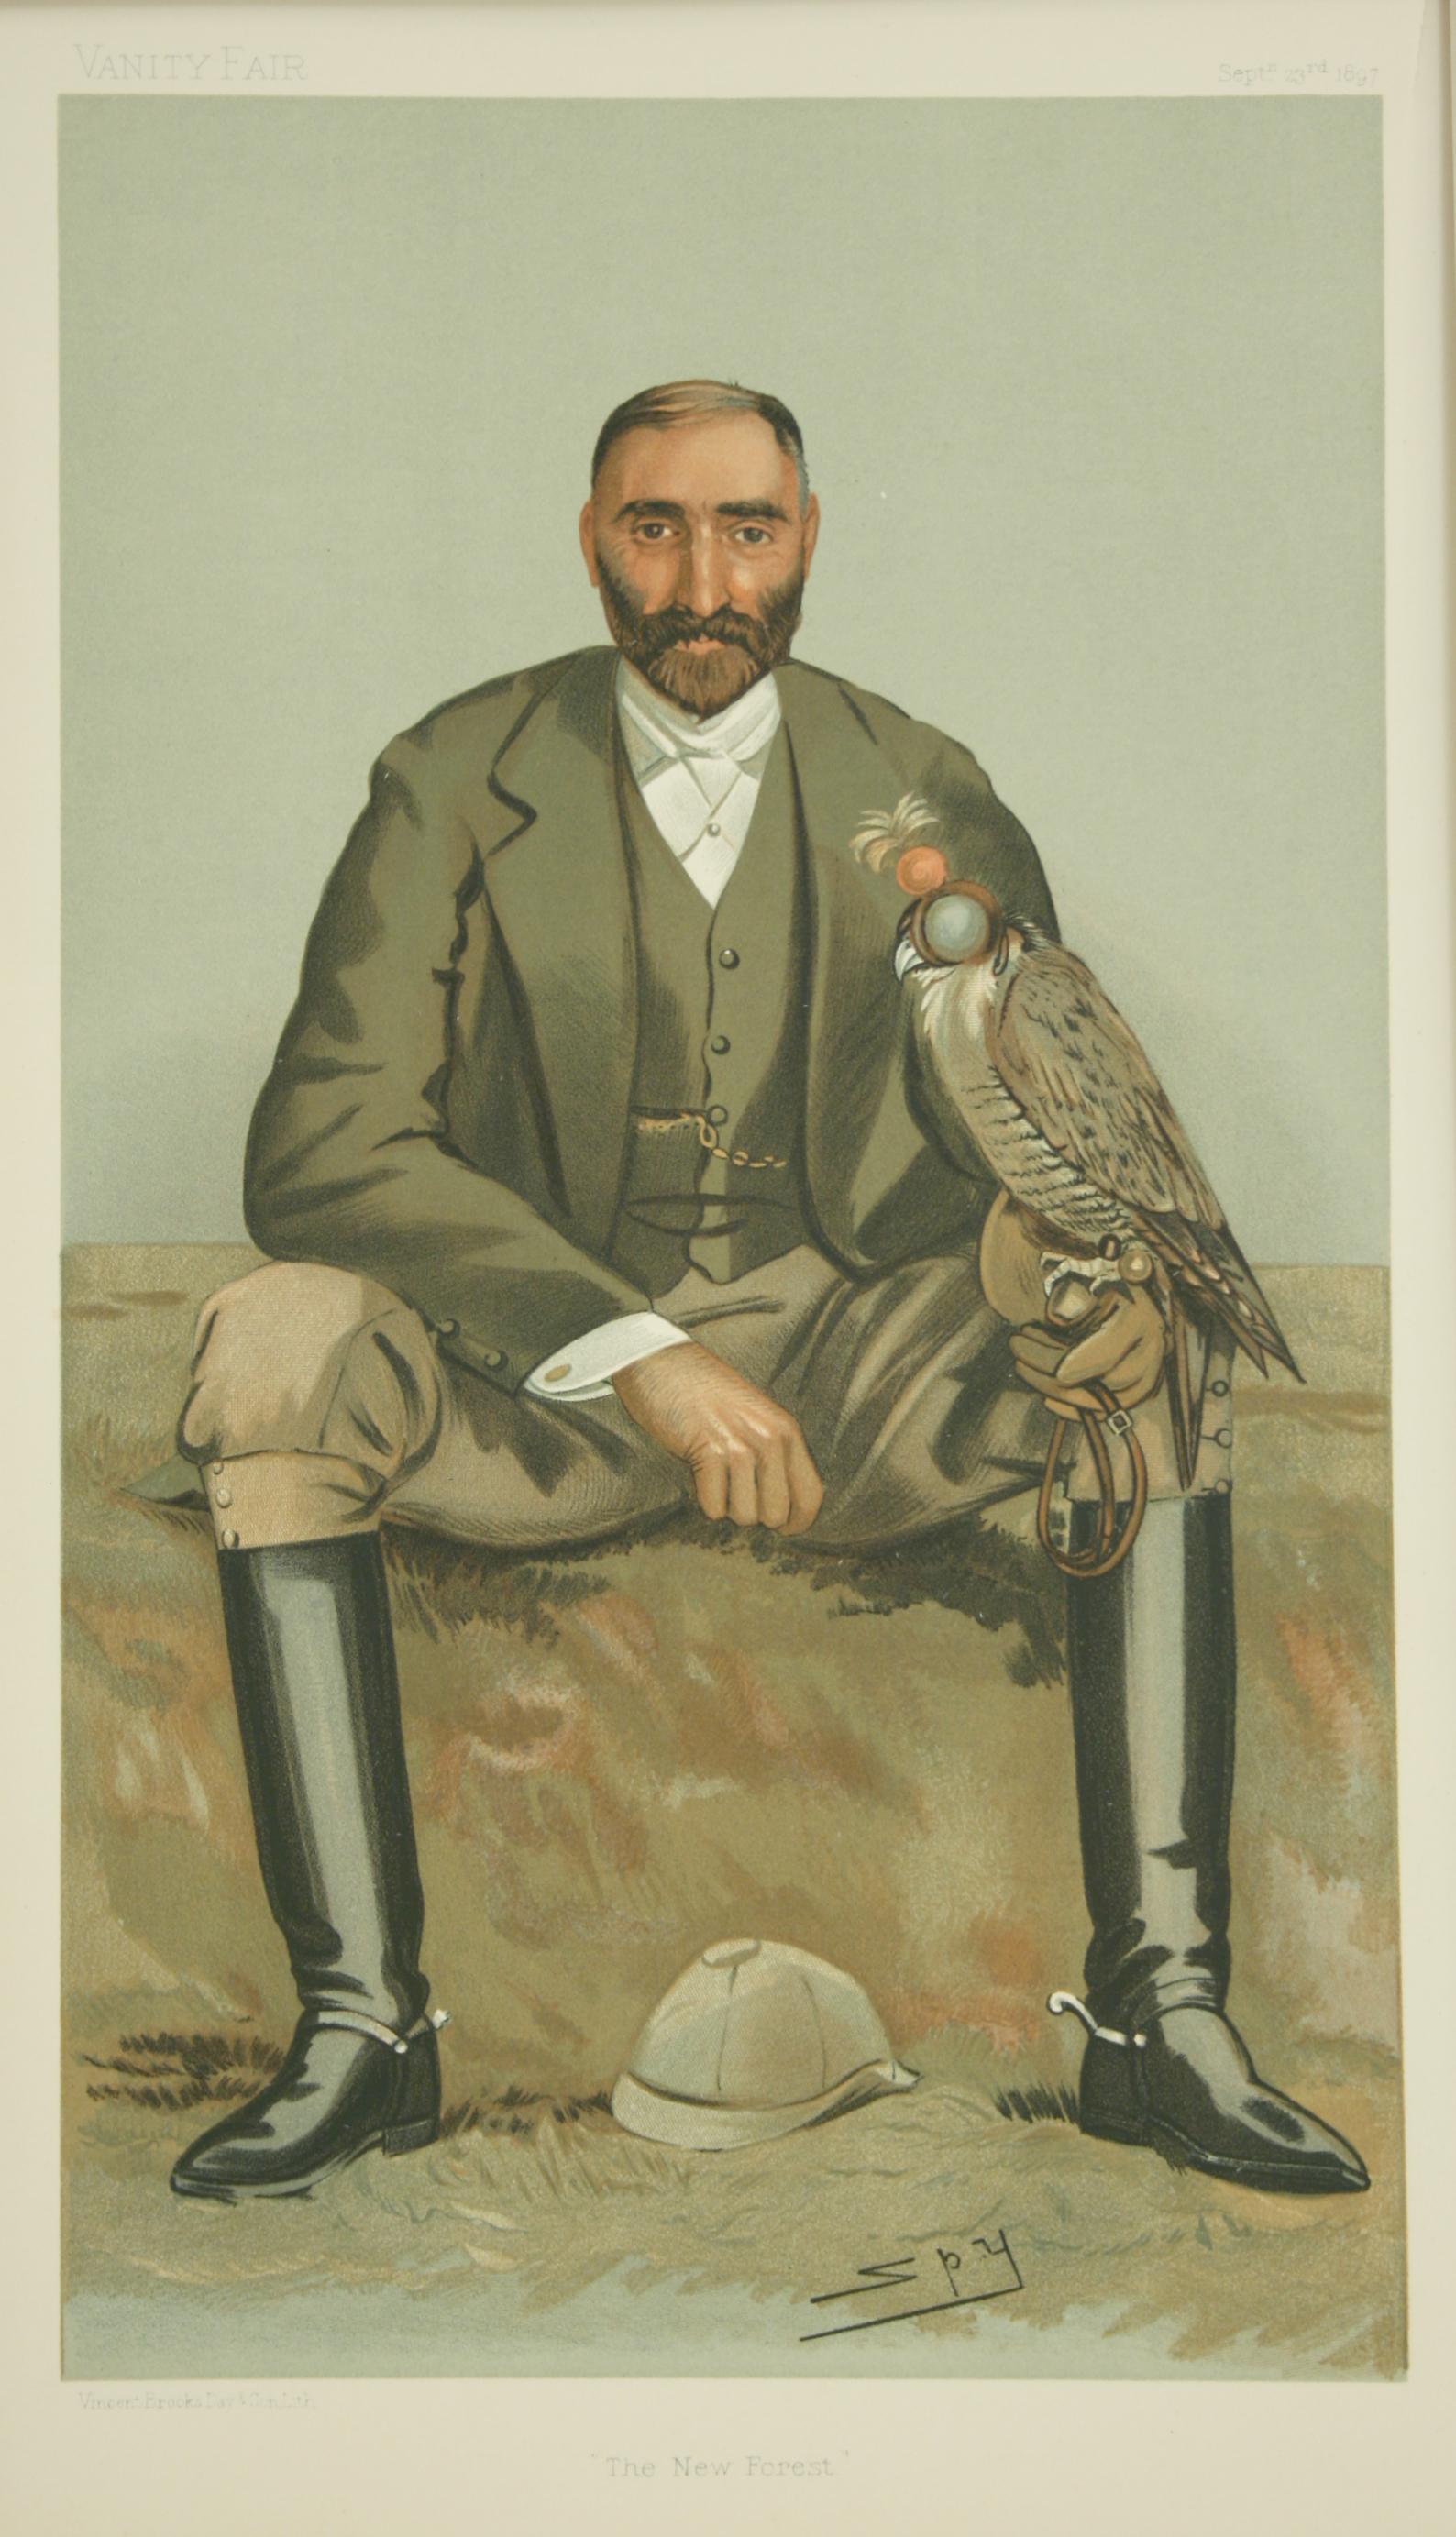 Vanity Fair 'SPY' Falconry print 'The New Forest'.
A mounted chromolithograph print published Sept. 23rd, 1897, by Vincent Brooks, Day & Son Ltd. Lith., for Vanity Fair. The picture is titled 'The New Forest' and is an original print of The Hon.